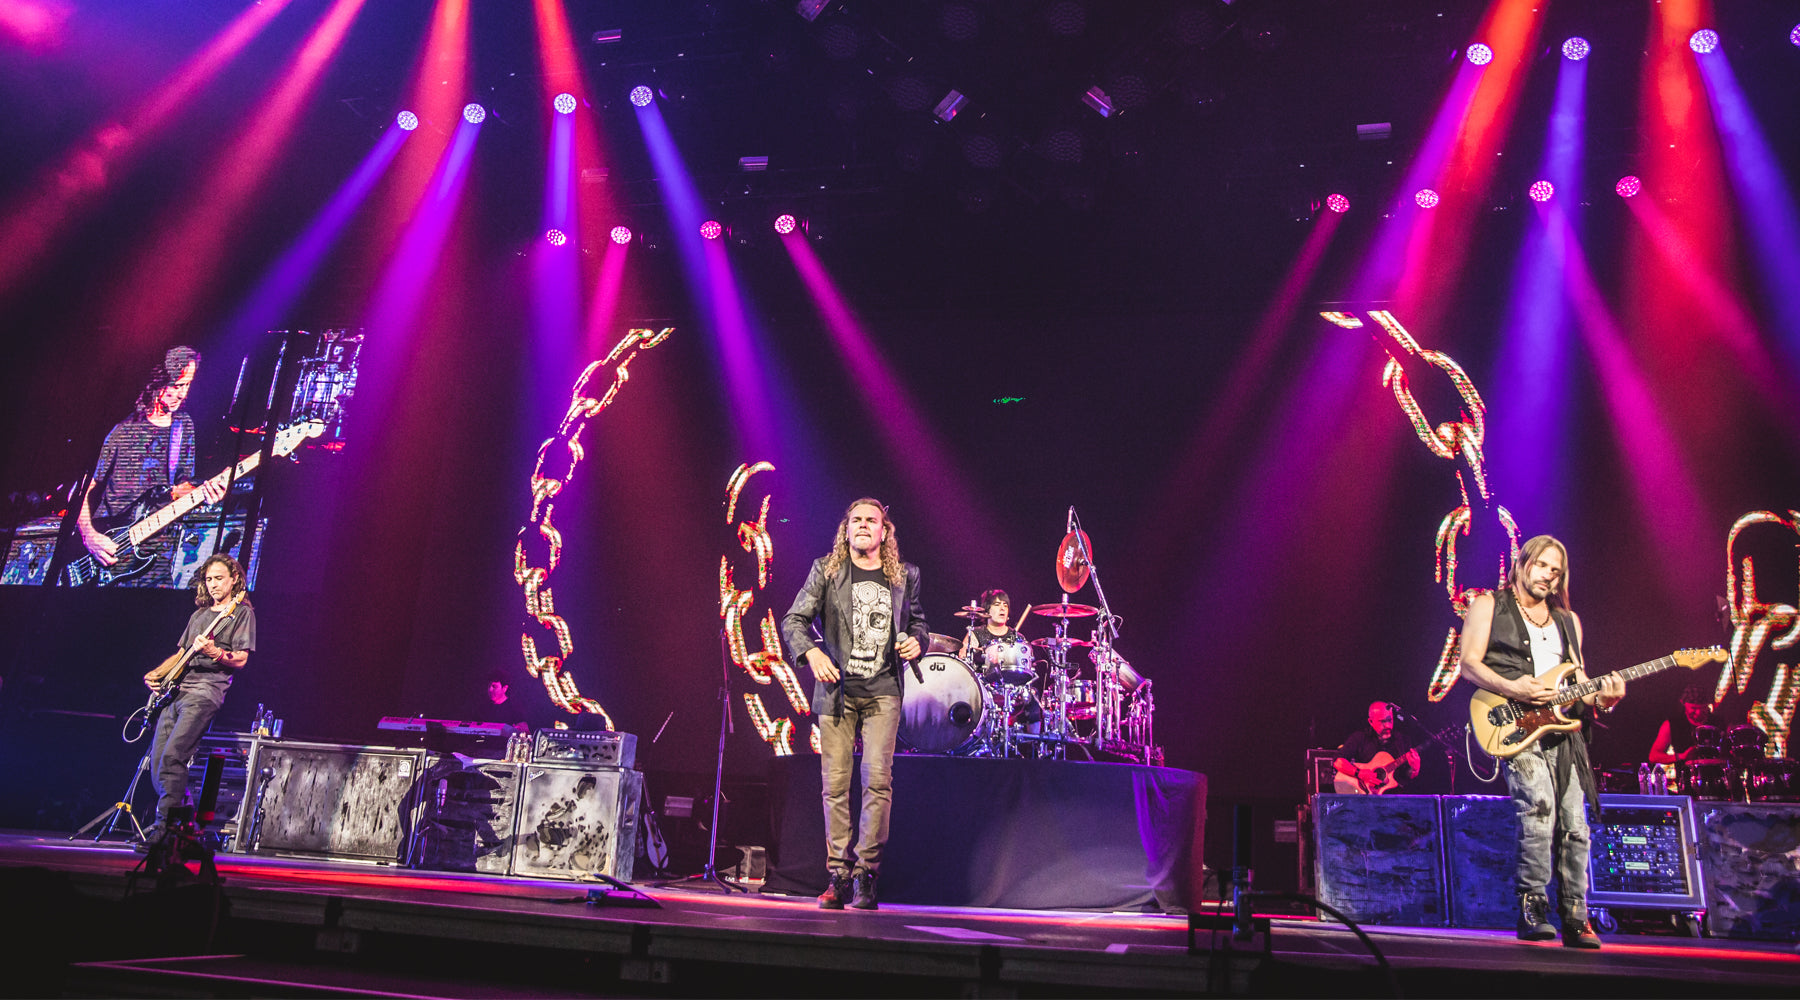 Score VIP Tickets to Maná and Join Them on Stage